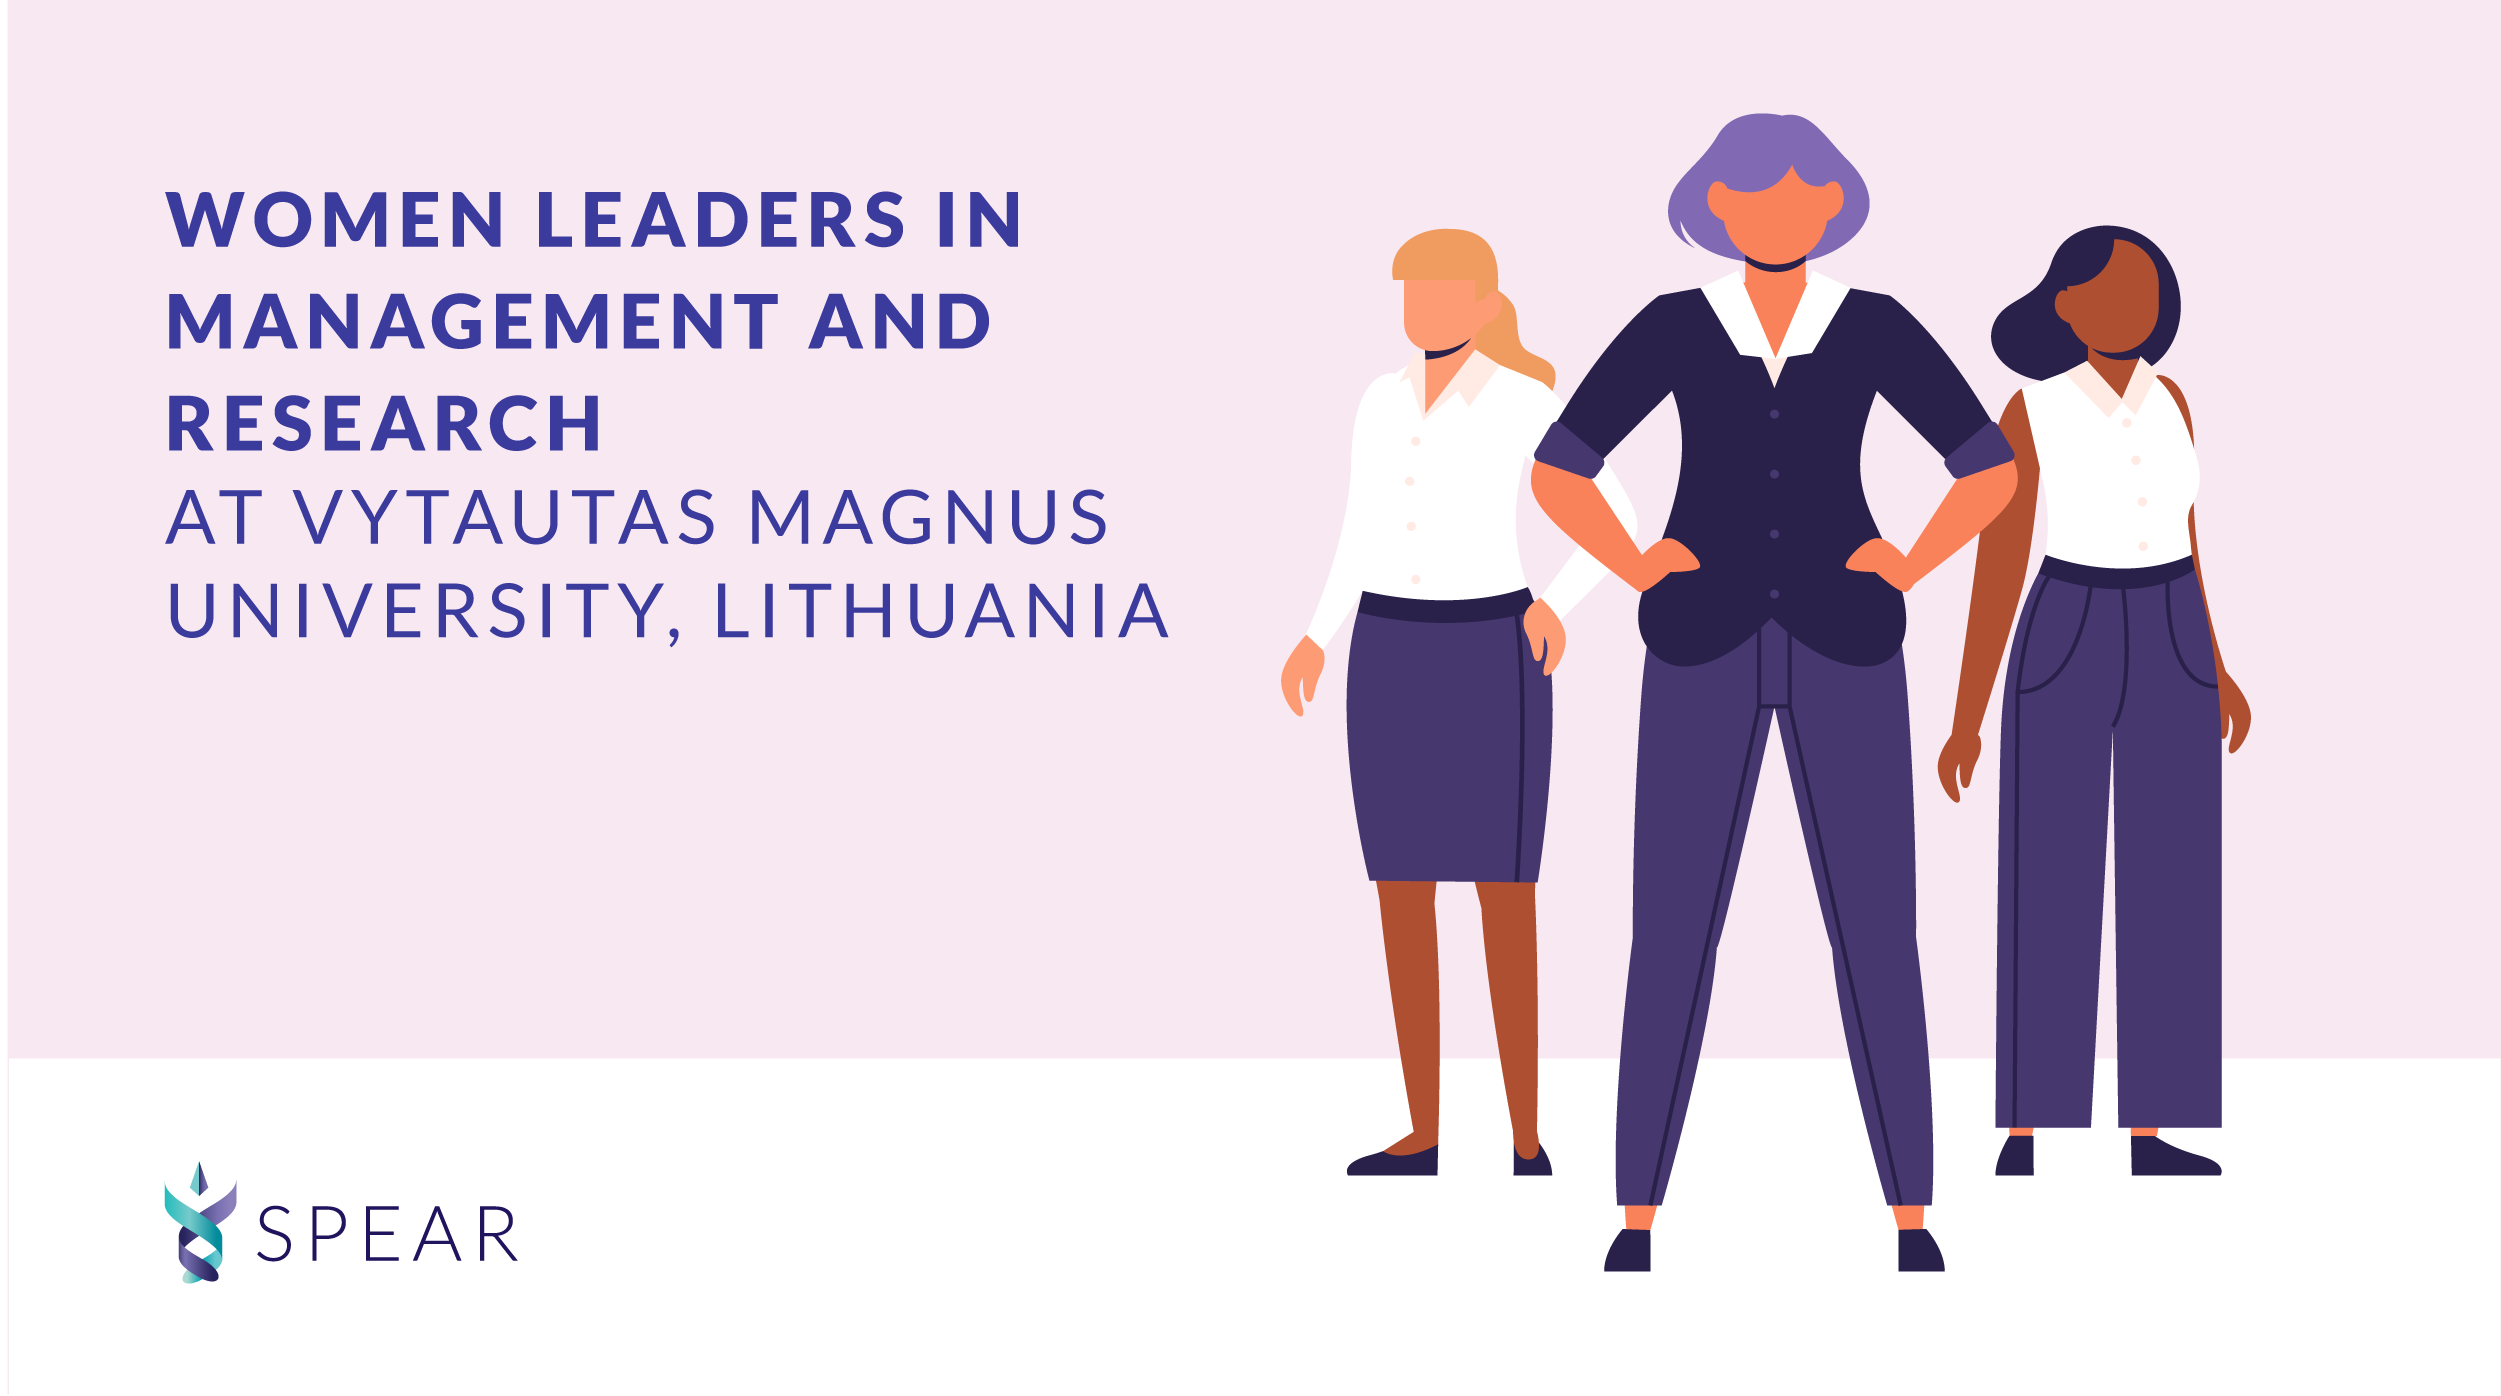 Women leaders in management and research at Vytautas Magnus University, Lithuania